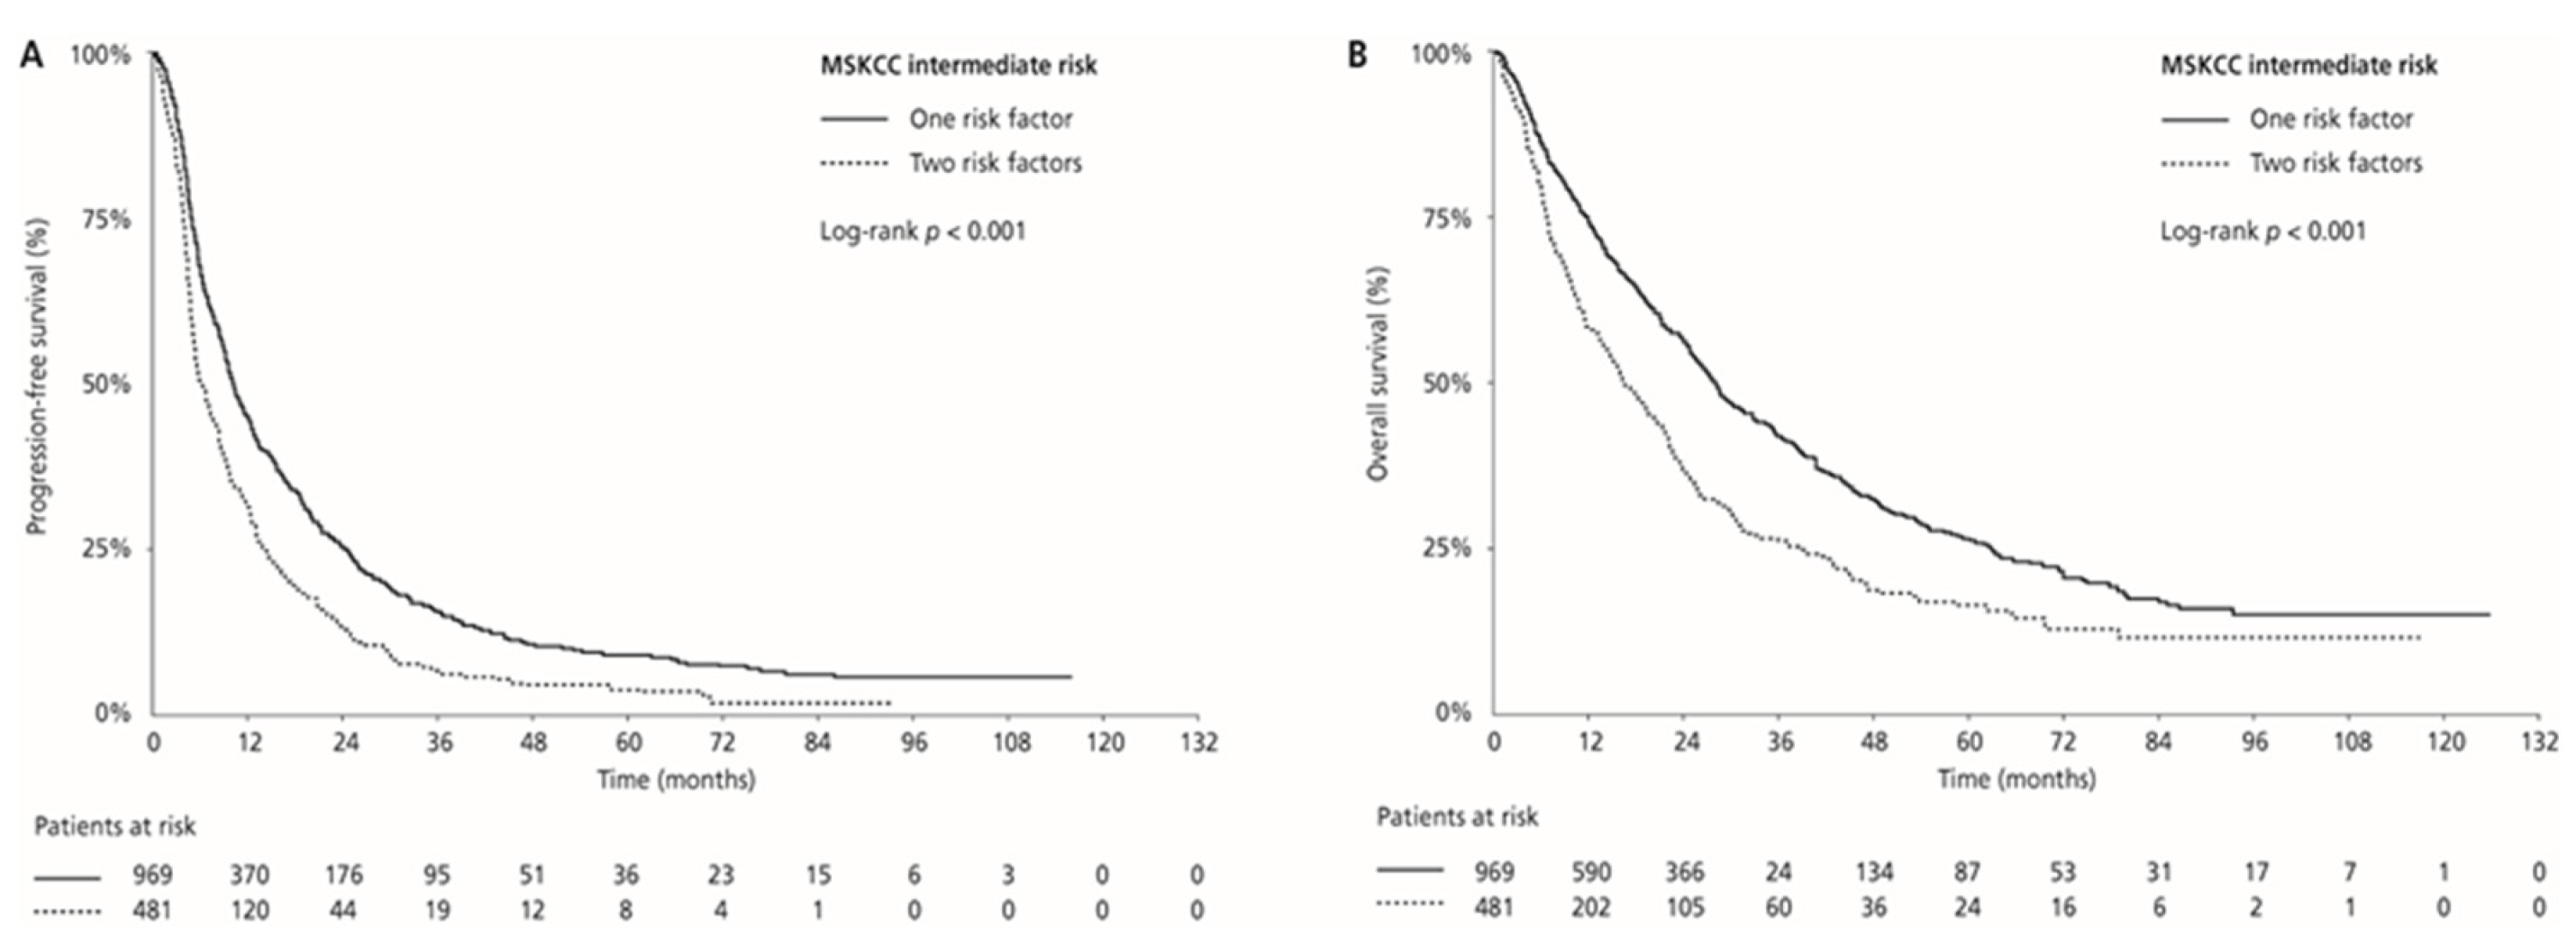 Cancers | Free Full-Text | Outcomes According to MSKCC Risk Score with  Focus on the Intermediate-Risk Group in Metastatic Renal Cell Carcinoma  Patients Treated with First-Line Sunitinib: A Retrospective Analysis of 2390